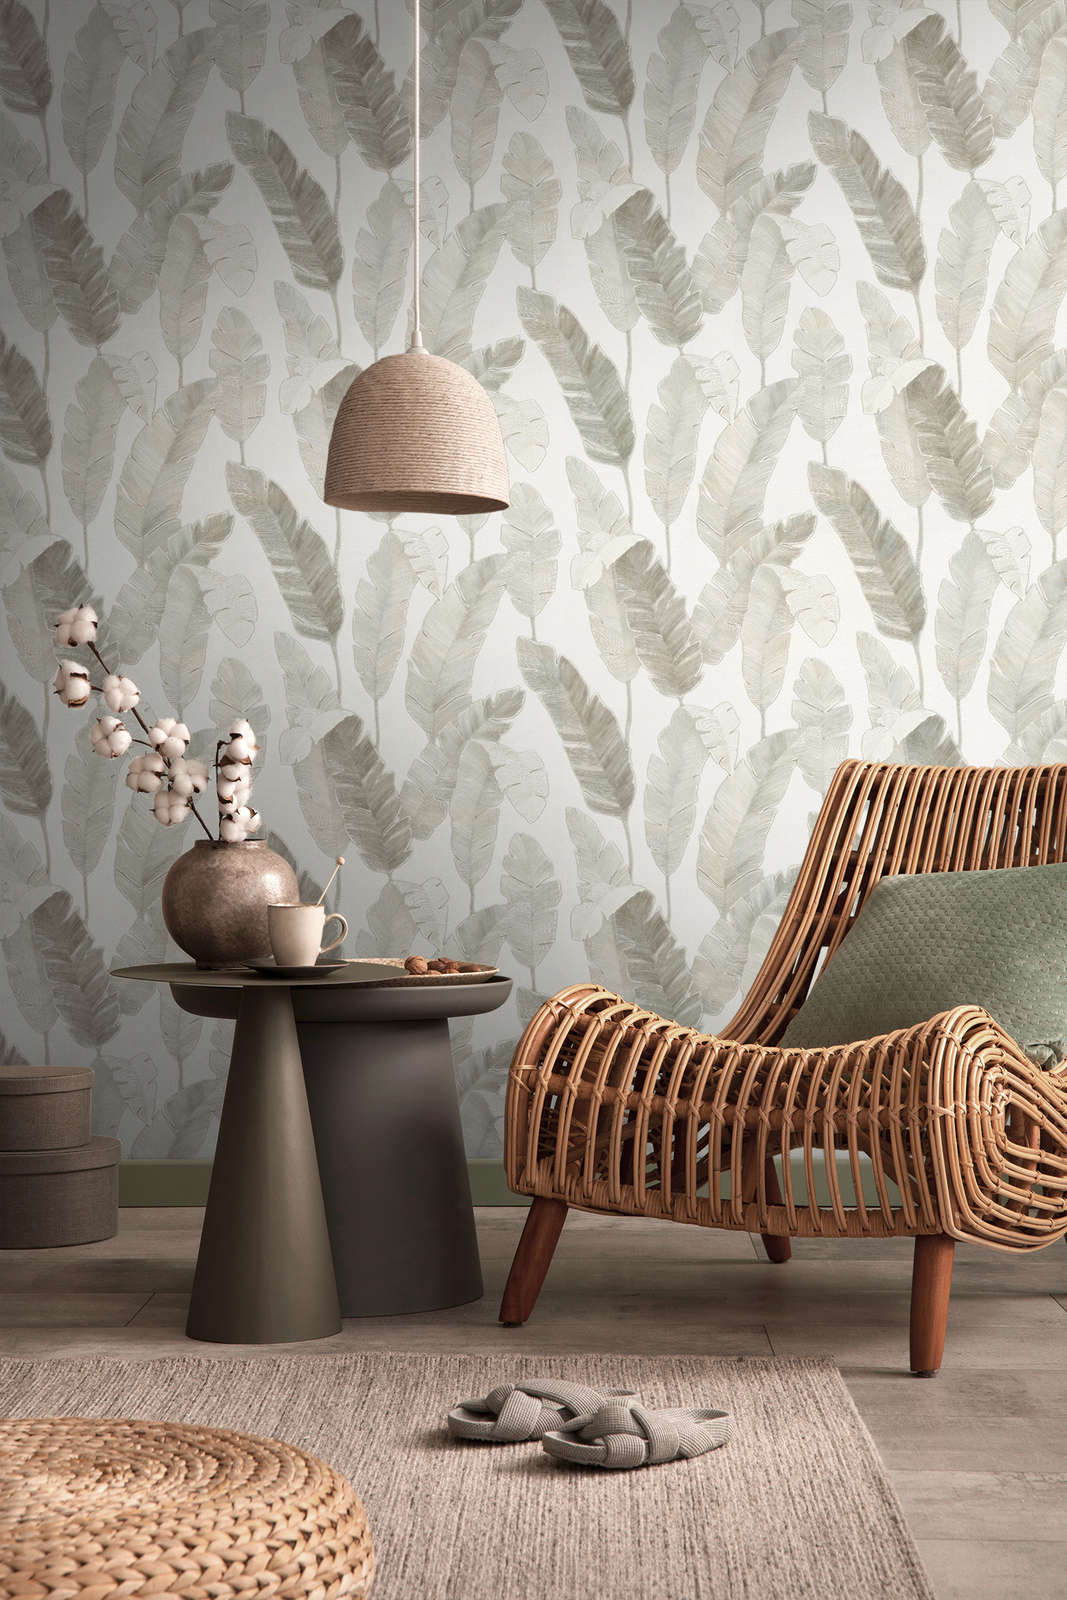             Non-woven wallpaper with subtle palm leaves - white, beige, grey
        